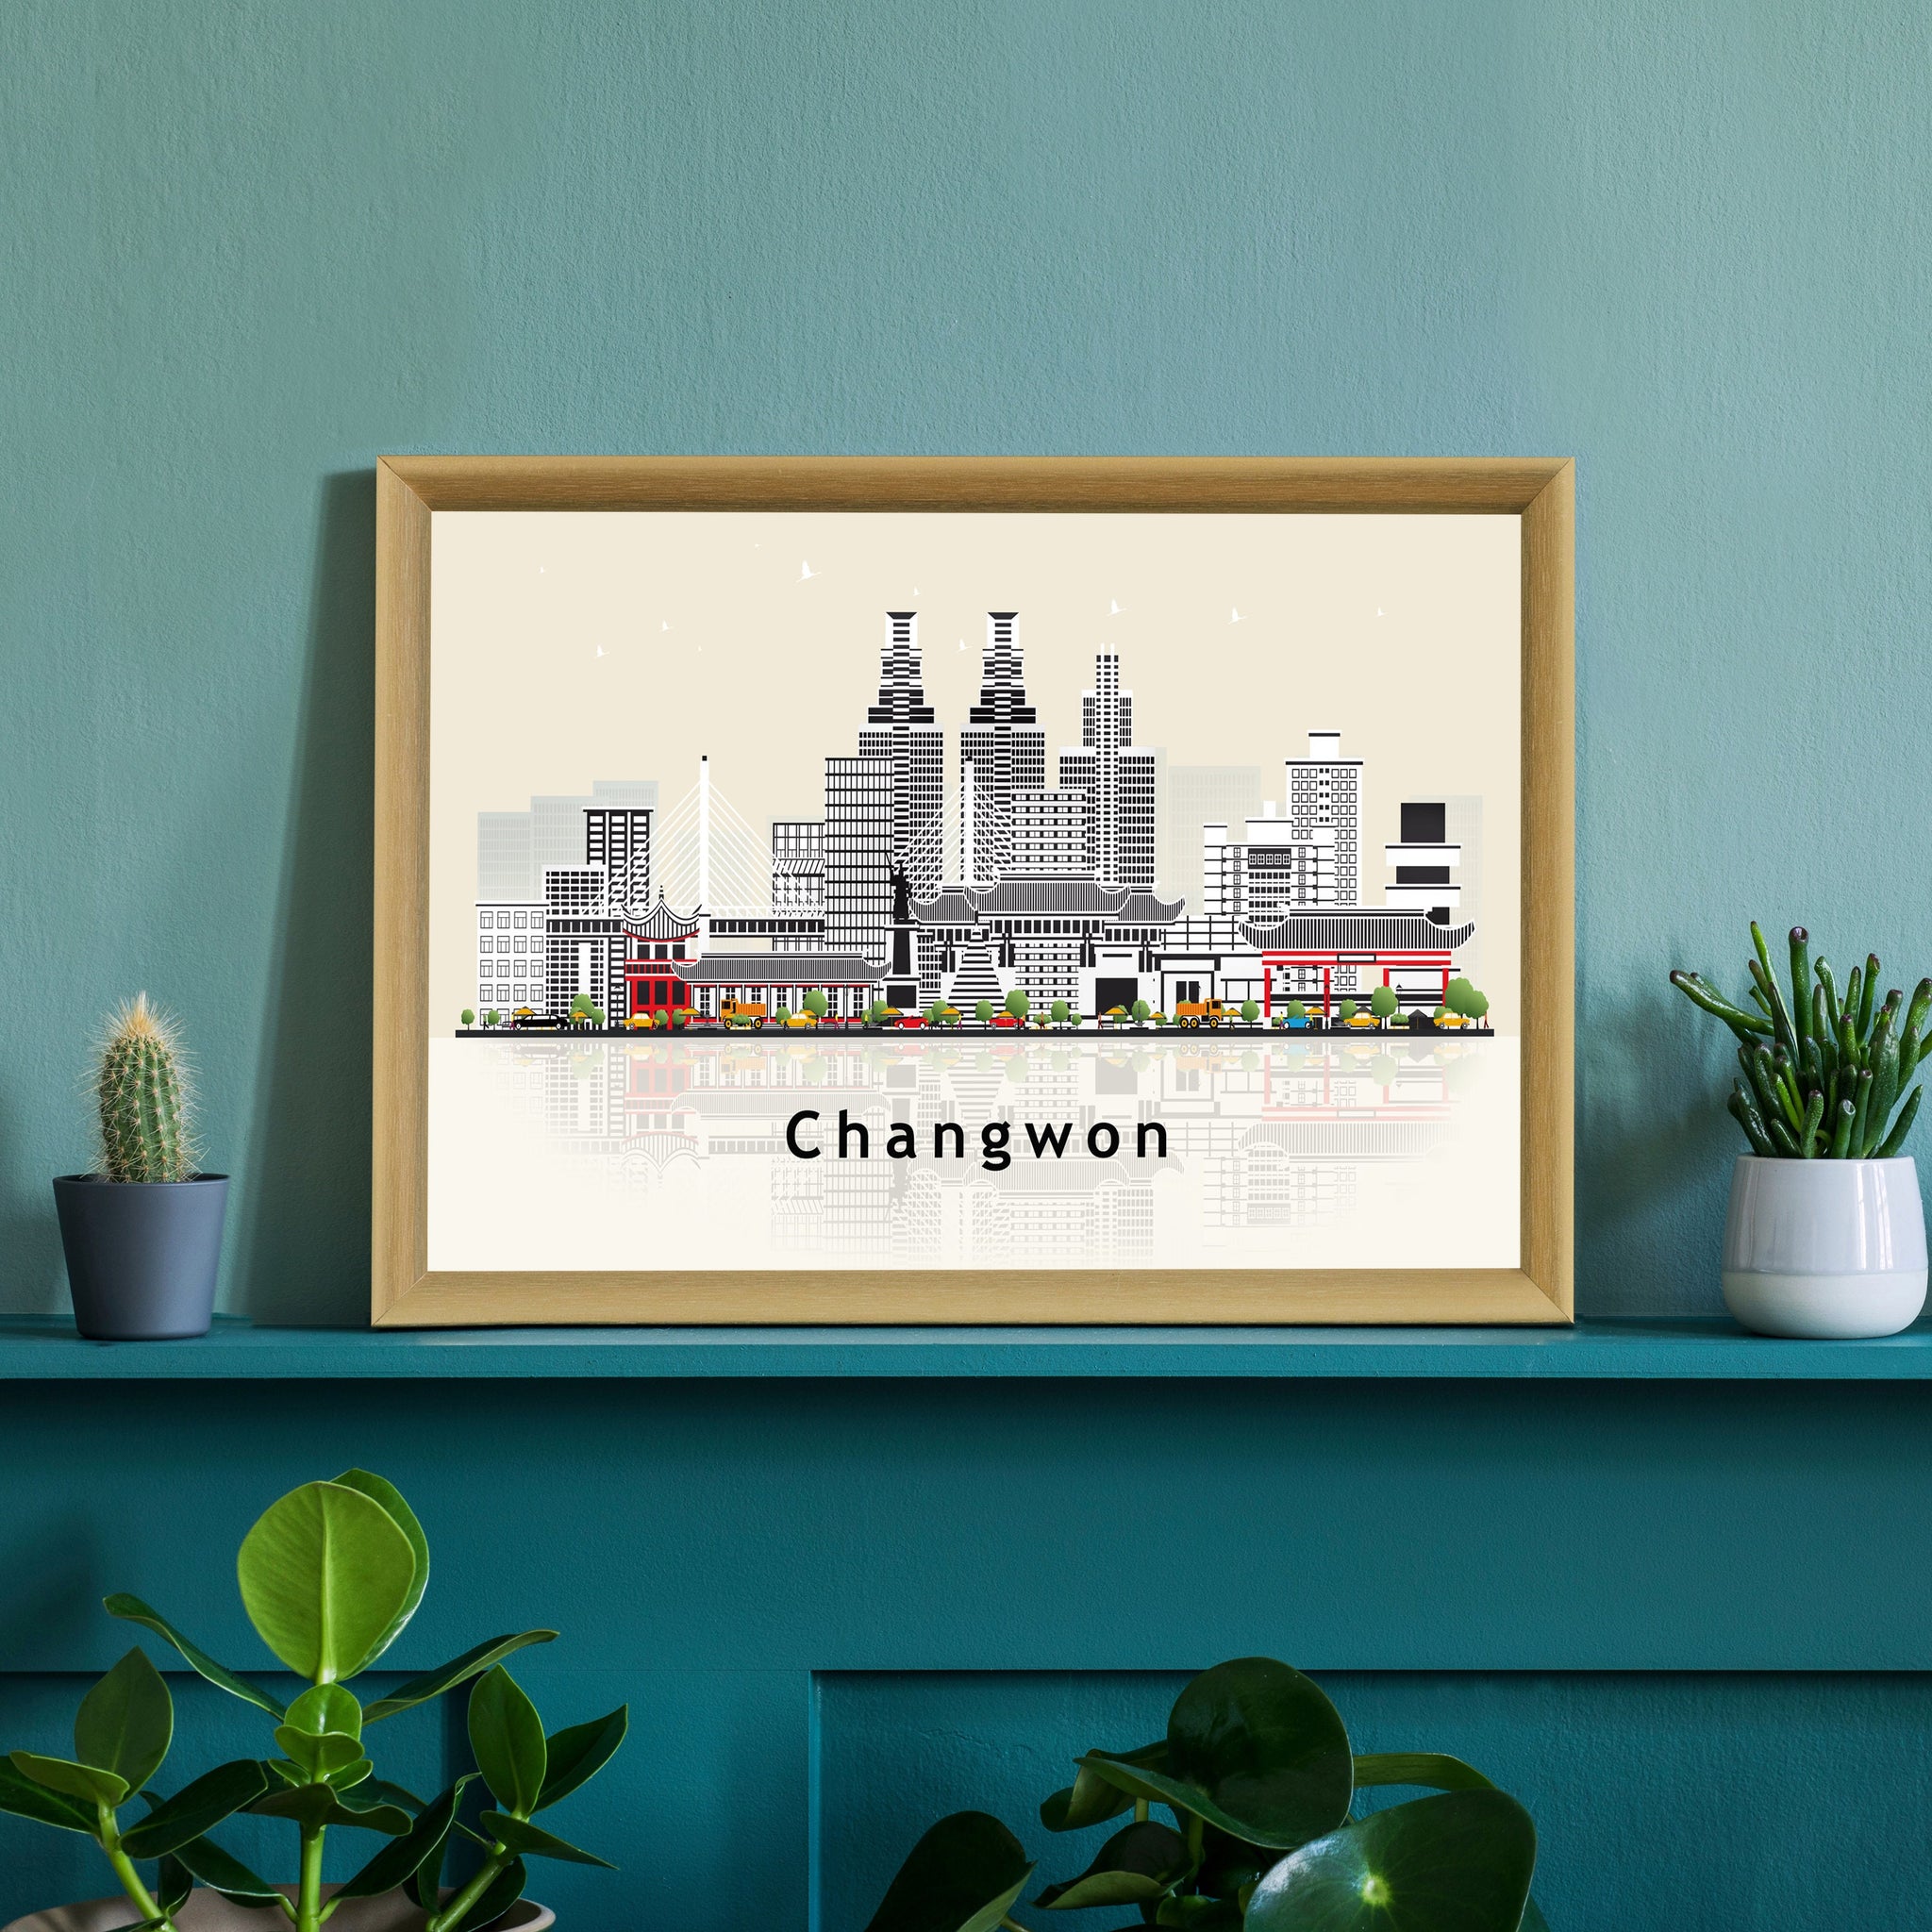 CHANGWON CHINA Illustration skyline poster, Modern skyline cityscape poster, China city skyline landmark map poster, Home wall decoration